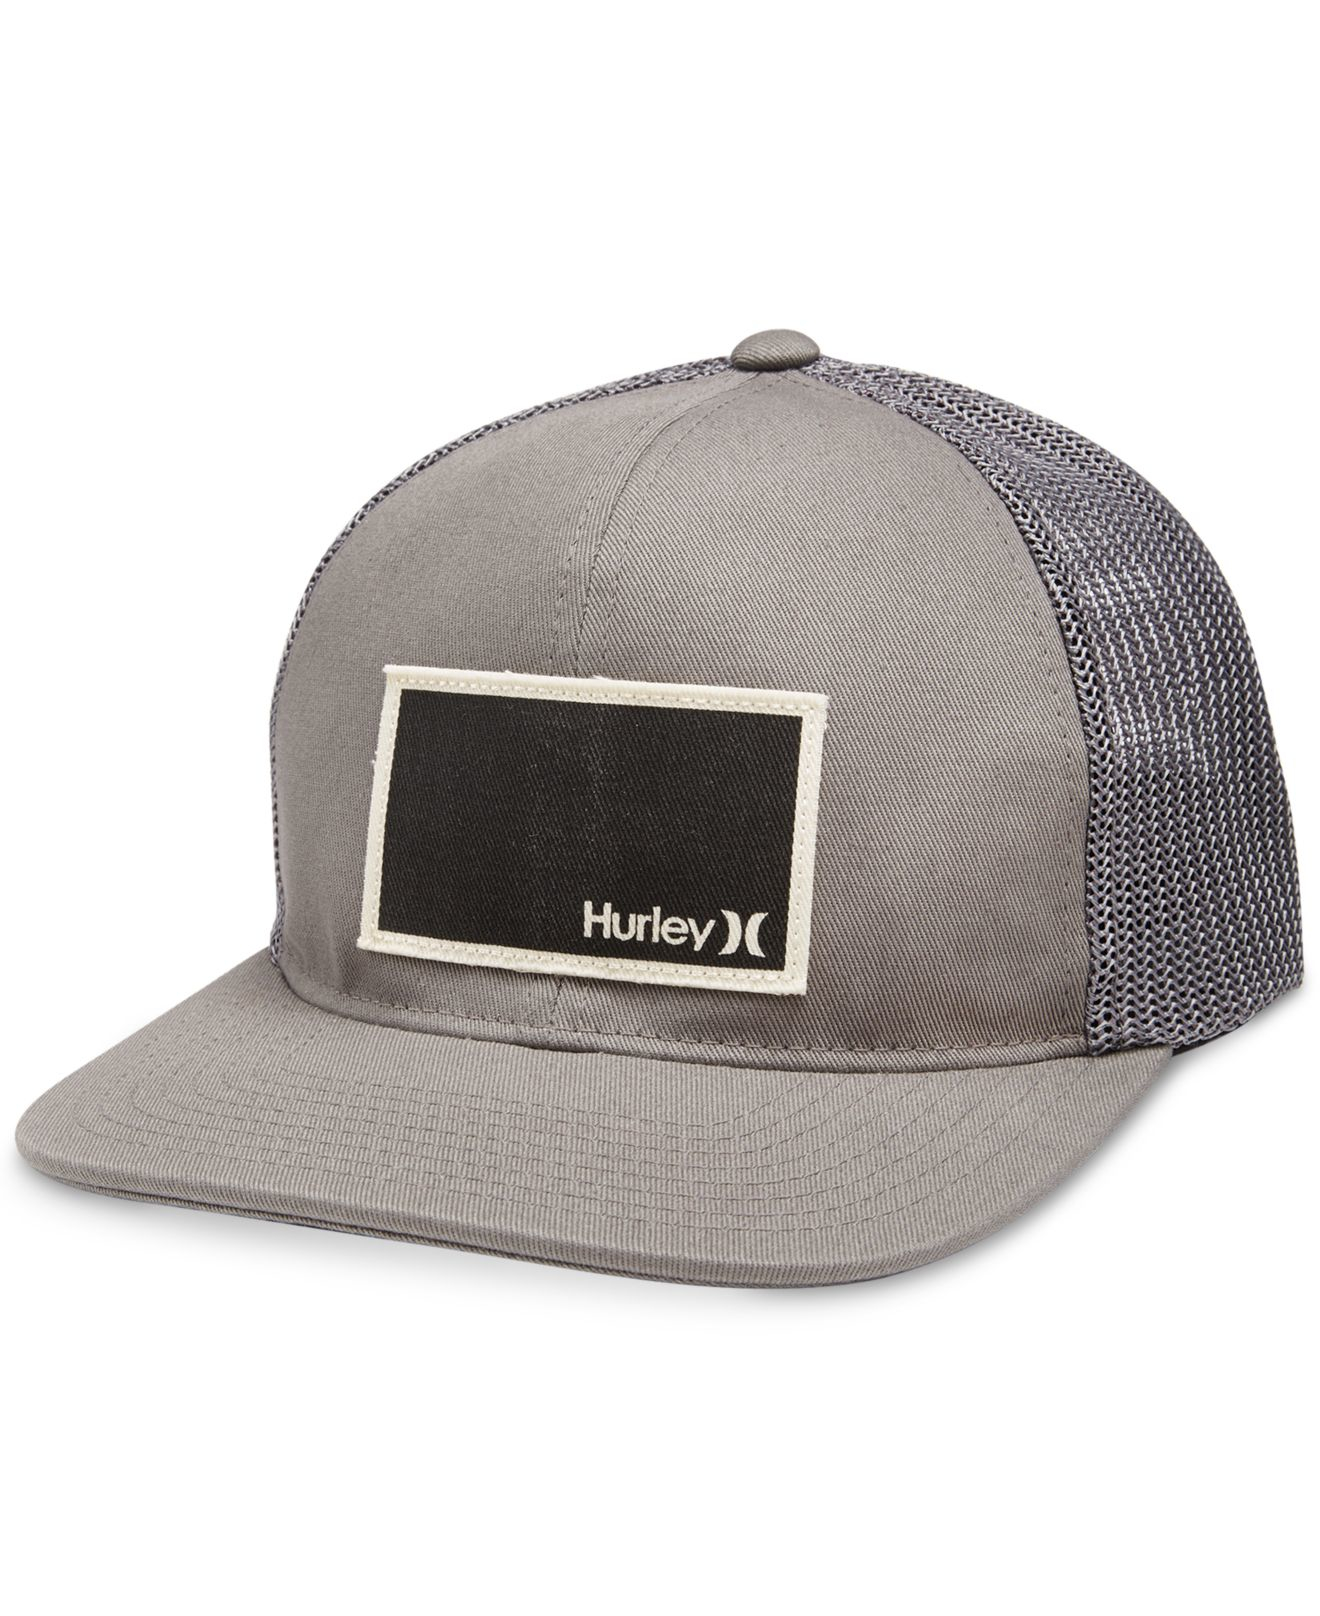 Lyst - Hurley Verdone Fit In Hat in Gray for Men